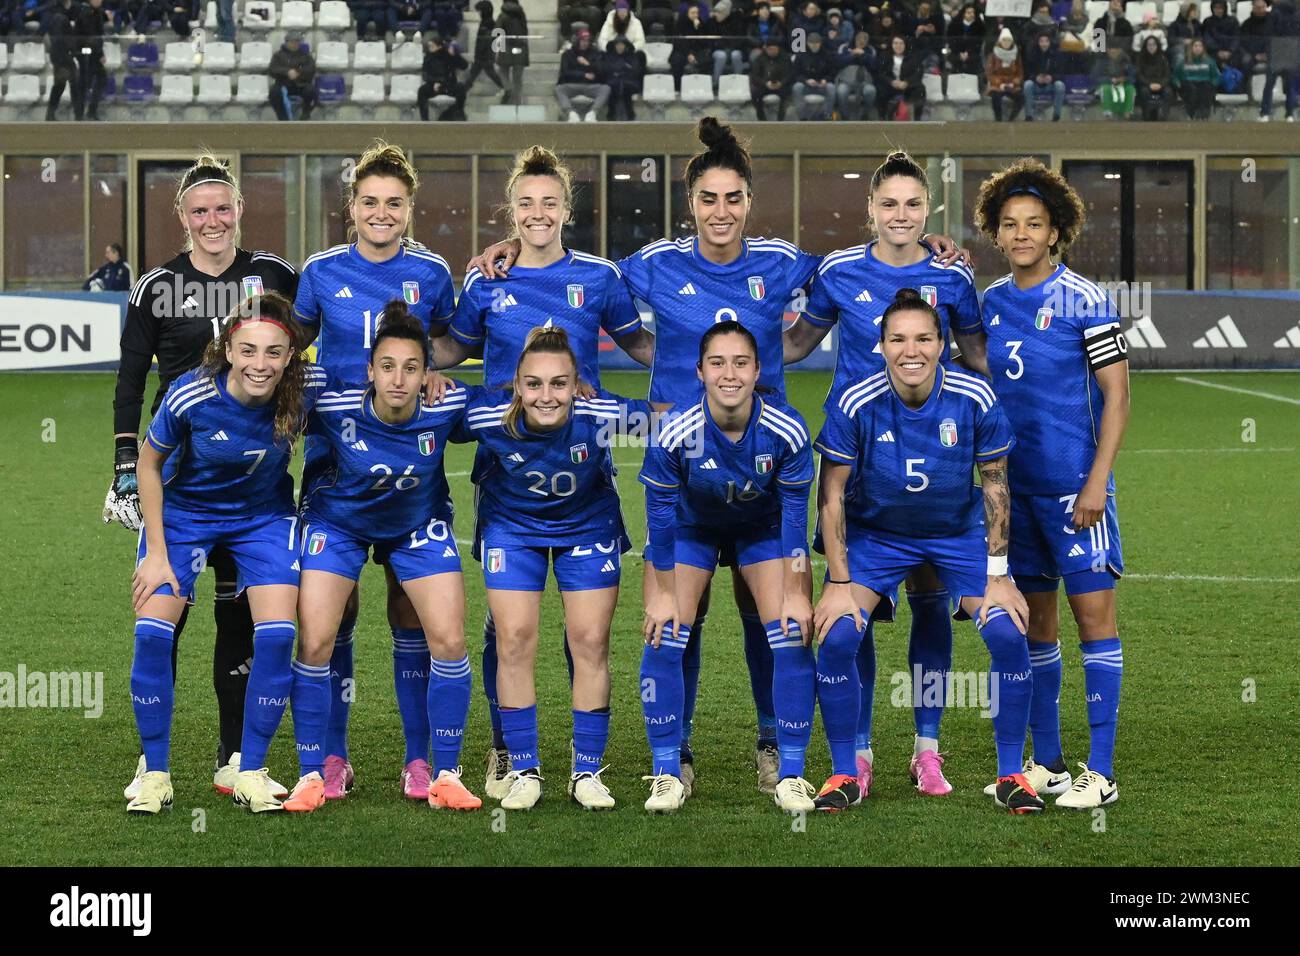 Italy Womenâ&#x80;&#x99;s National Team players pose for a team photo during the Women's International Friendly Match between Italy Women's National Team vs Ireland Women's National Team on 23 February 2024 at 'Rocco B. Commisso' Viola Park, Bagno a Ripoli, Florence, Italy Stock Photo